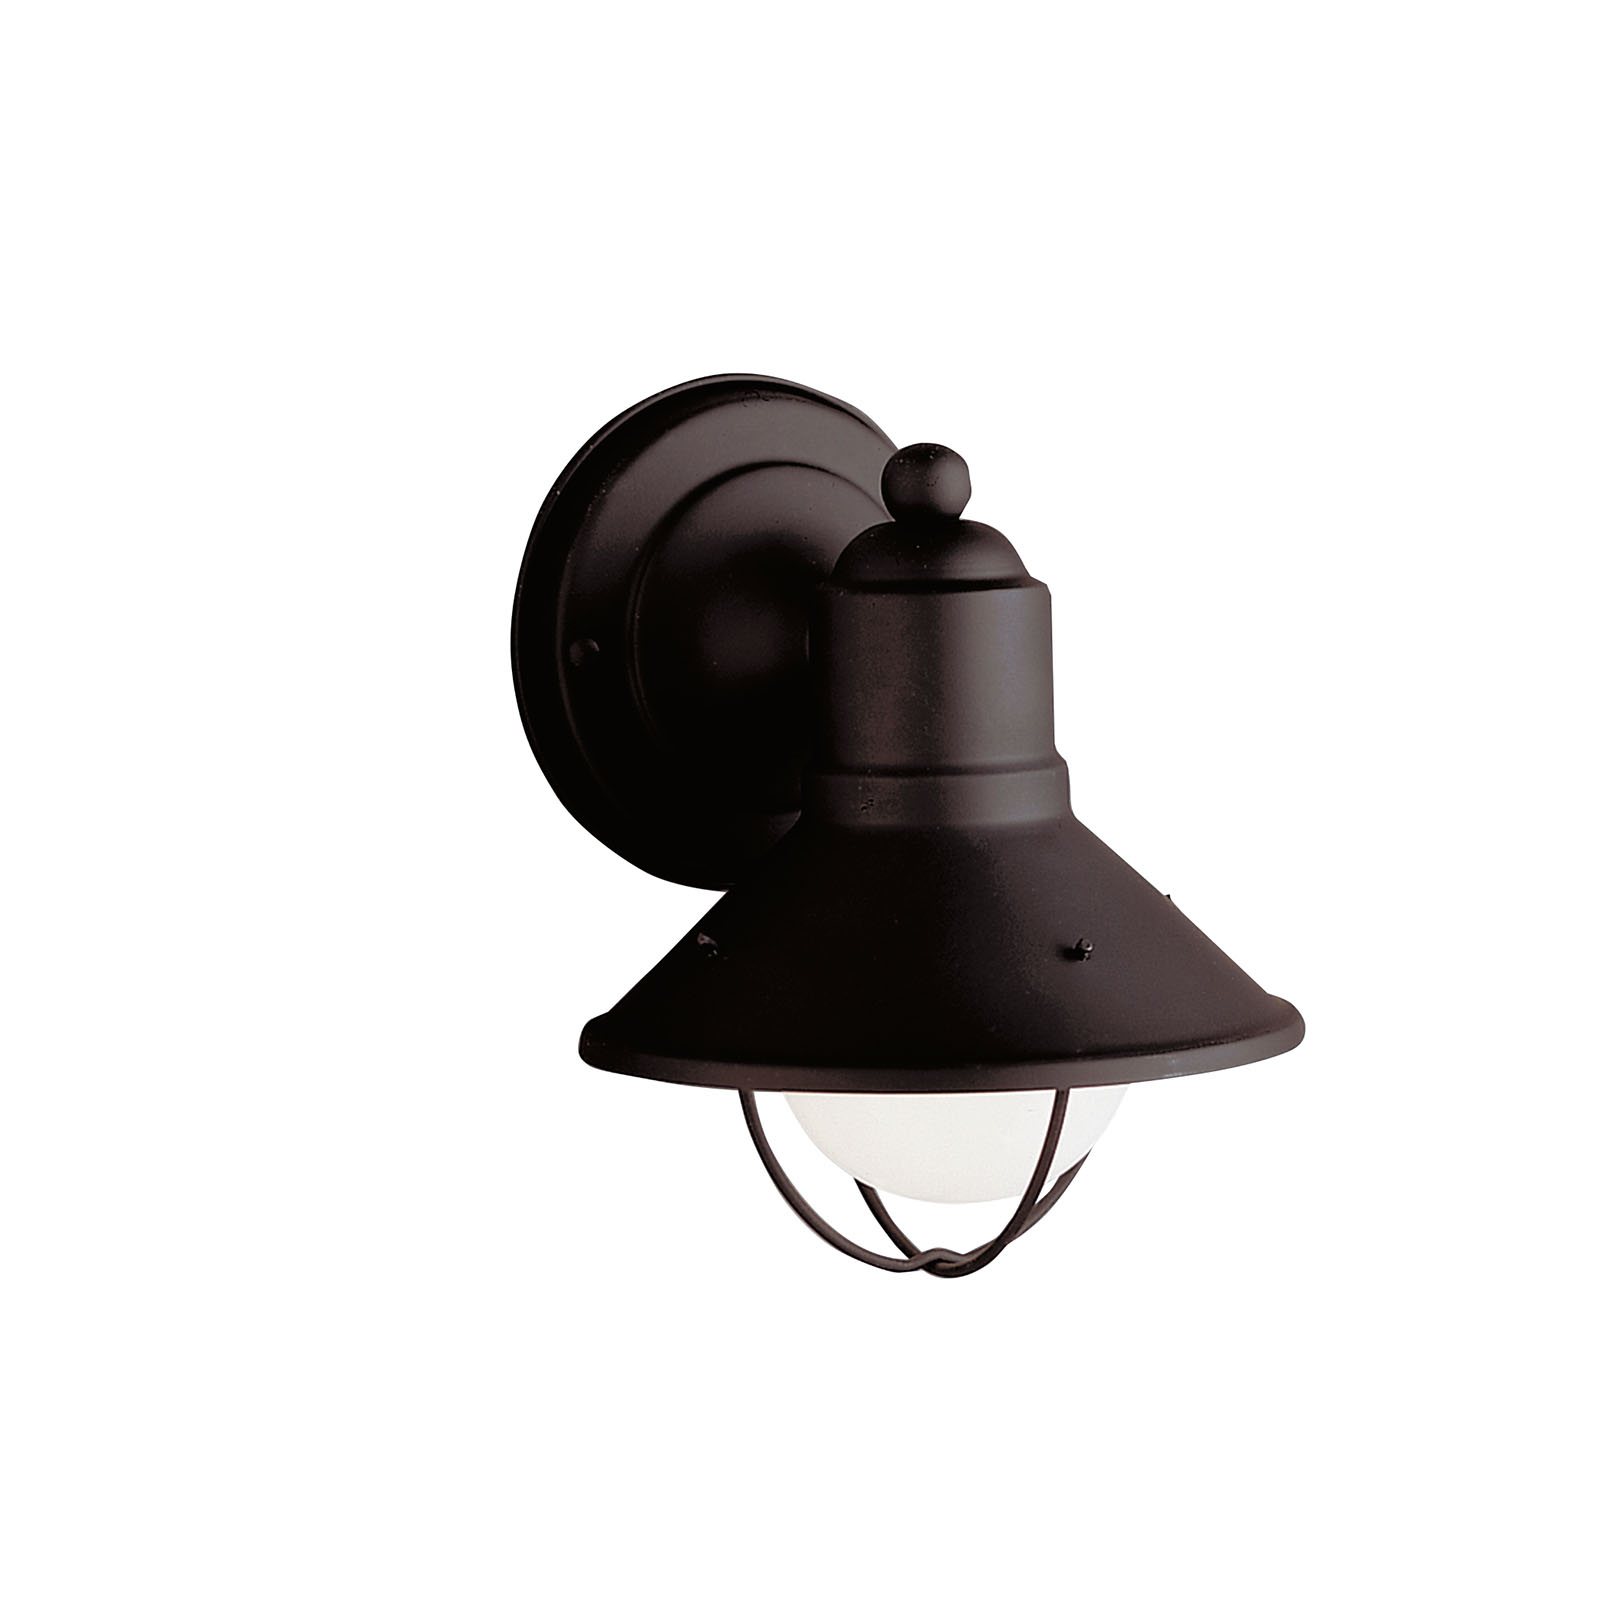 The Seaside(TM) 7.5in. 1 light outdoor wall light features a classic look with its Black finish and glass globe. The Seaside(TM)wall light works in several aesthetic environments, including rustic, coastal, traditional and transitional.